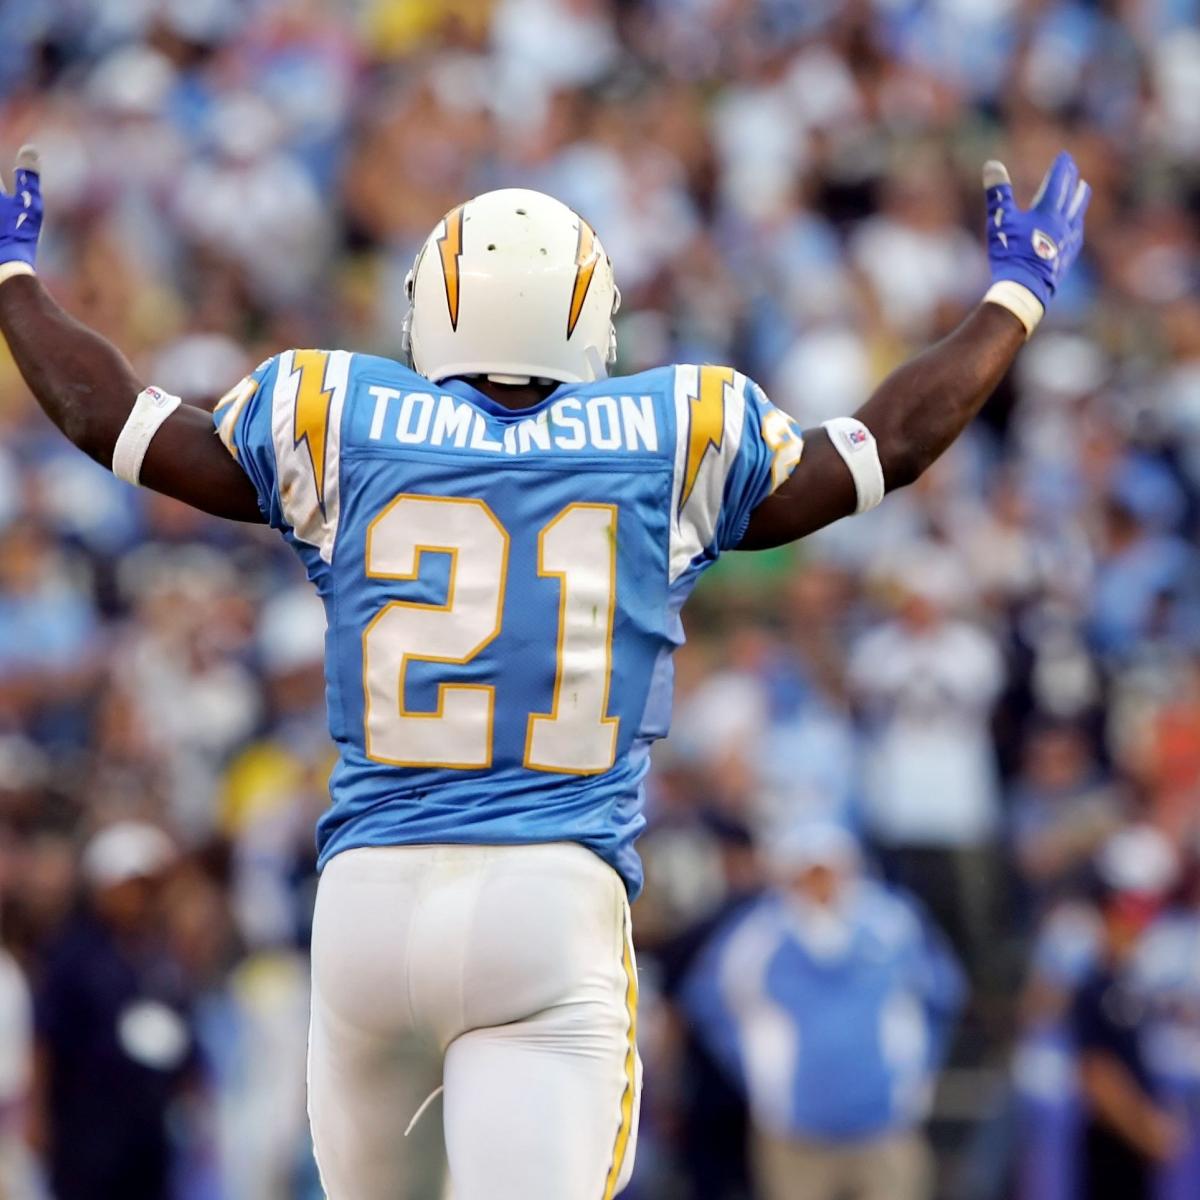 LaDainian Tomlinson Retirement: What Today's Top RB's Must Learn